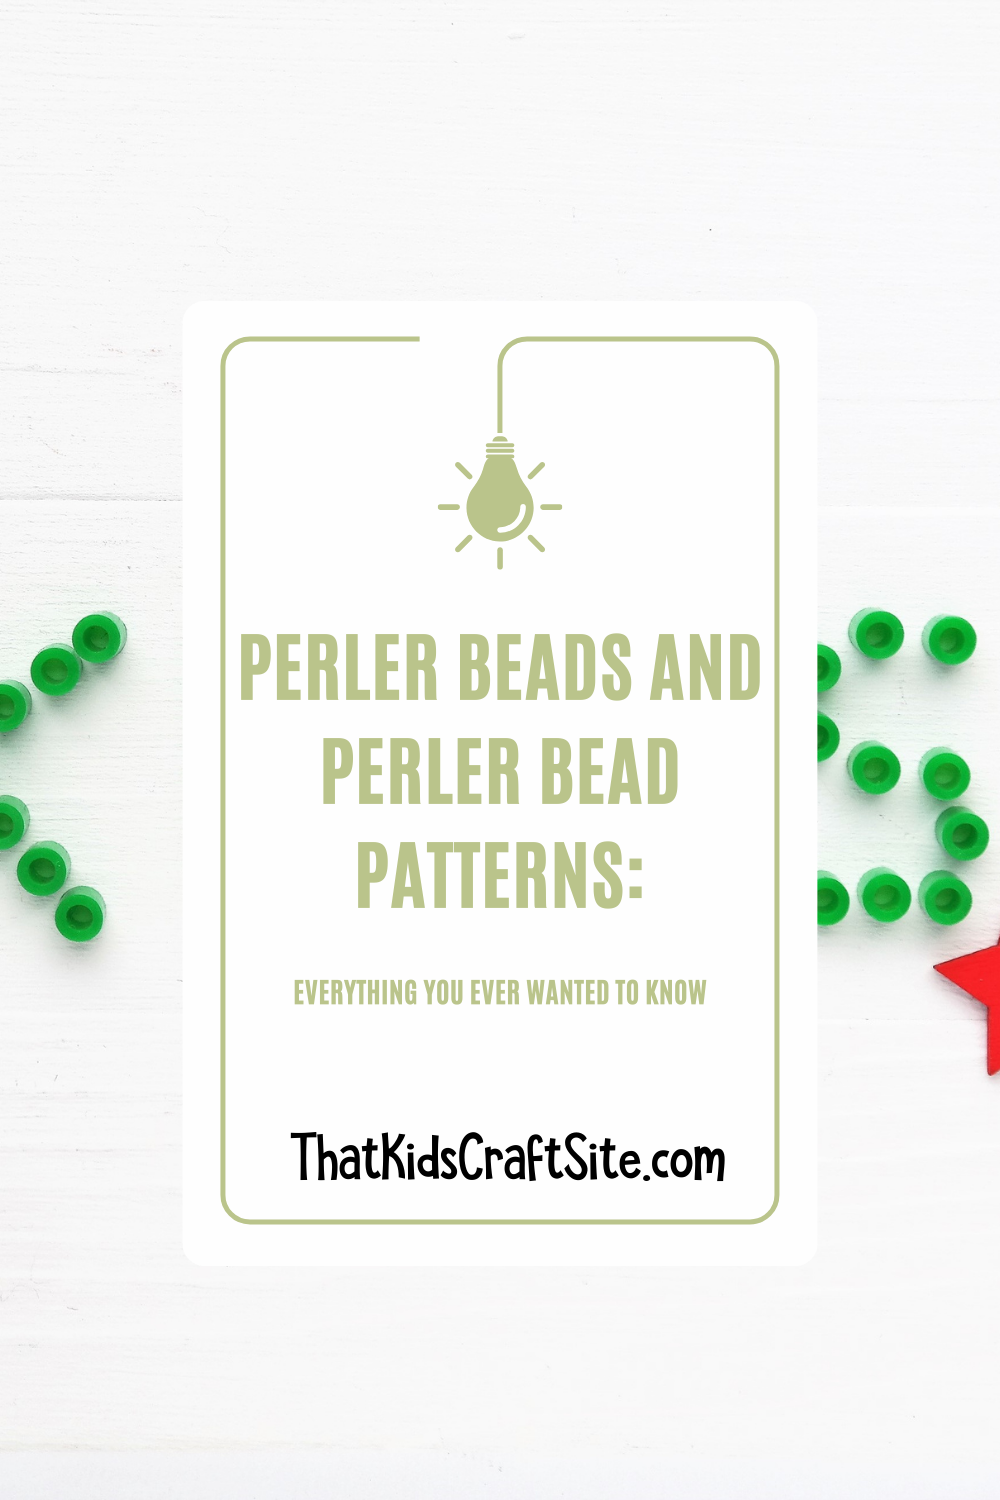 Perler Beads and Perler Bead Patterns: Everything You Ever Wanted to Know